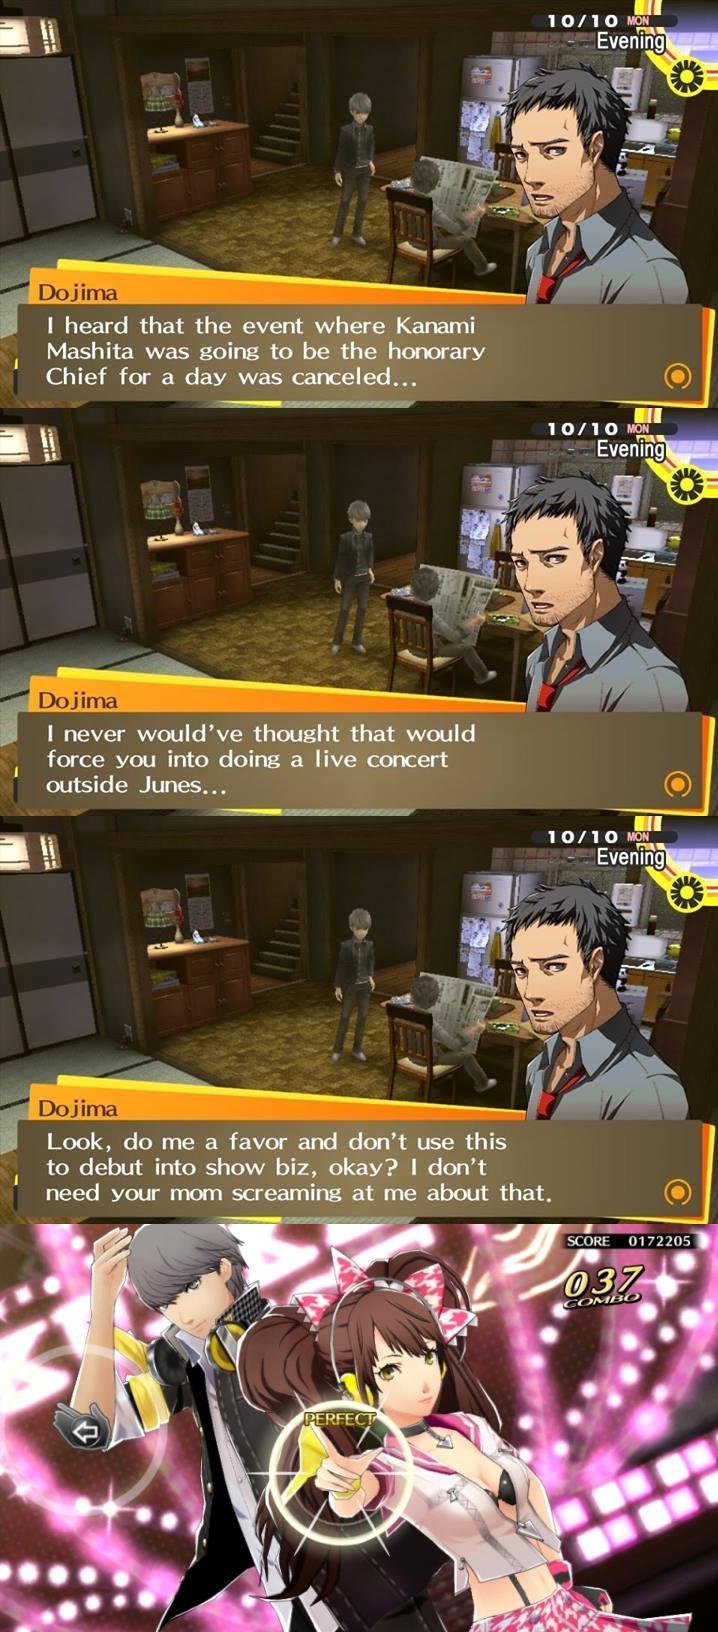 To be fair Dojima, the way you phrased that implied that only you would get in trouble